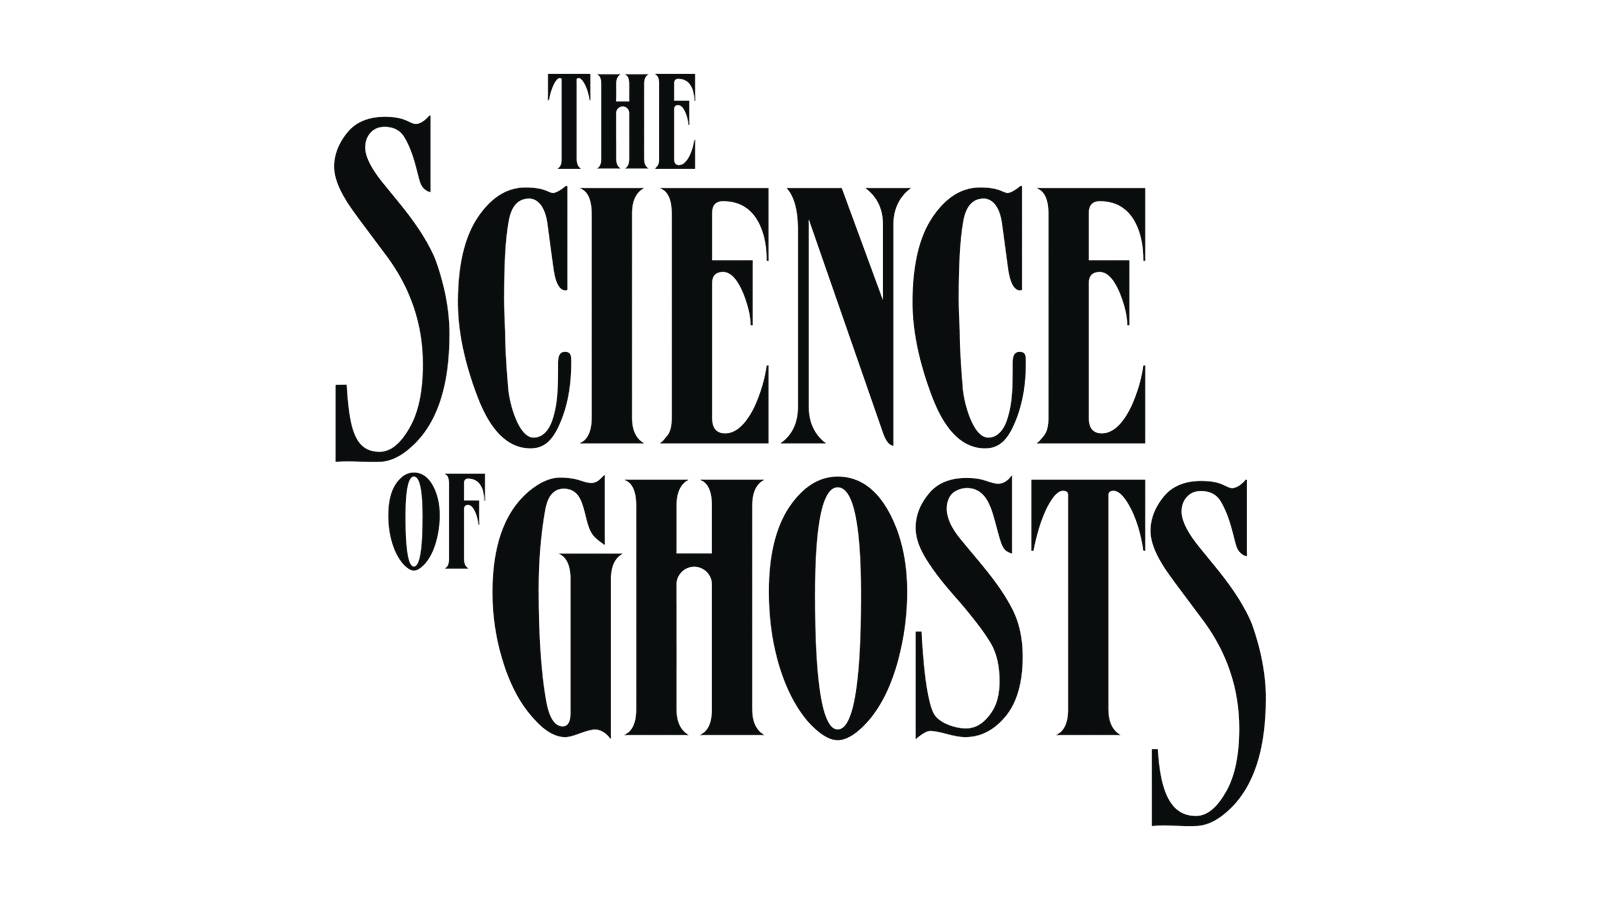 SCIENCE OF GHOSTS TP